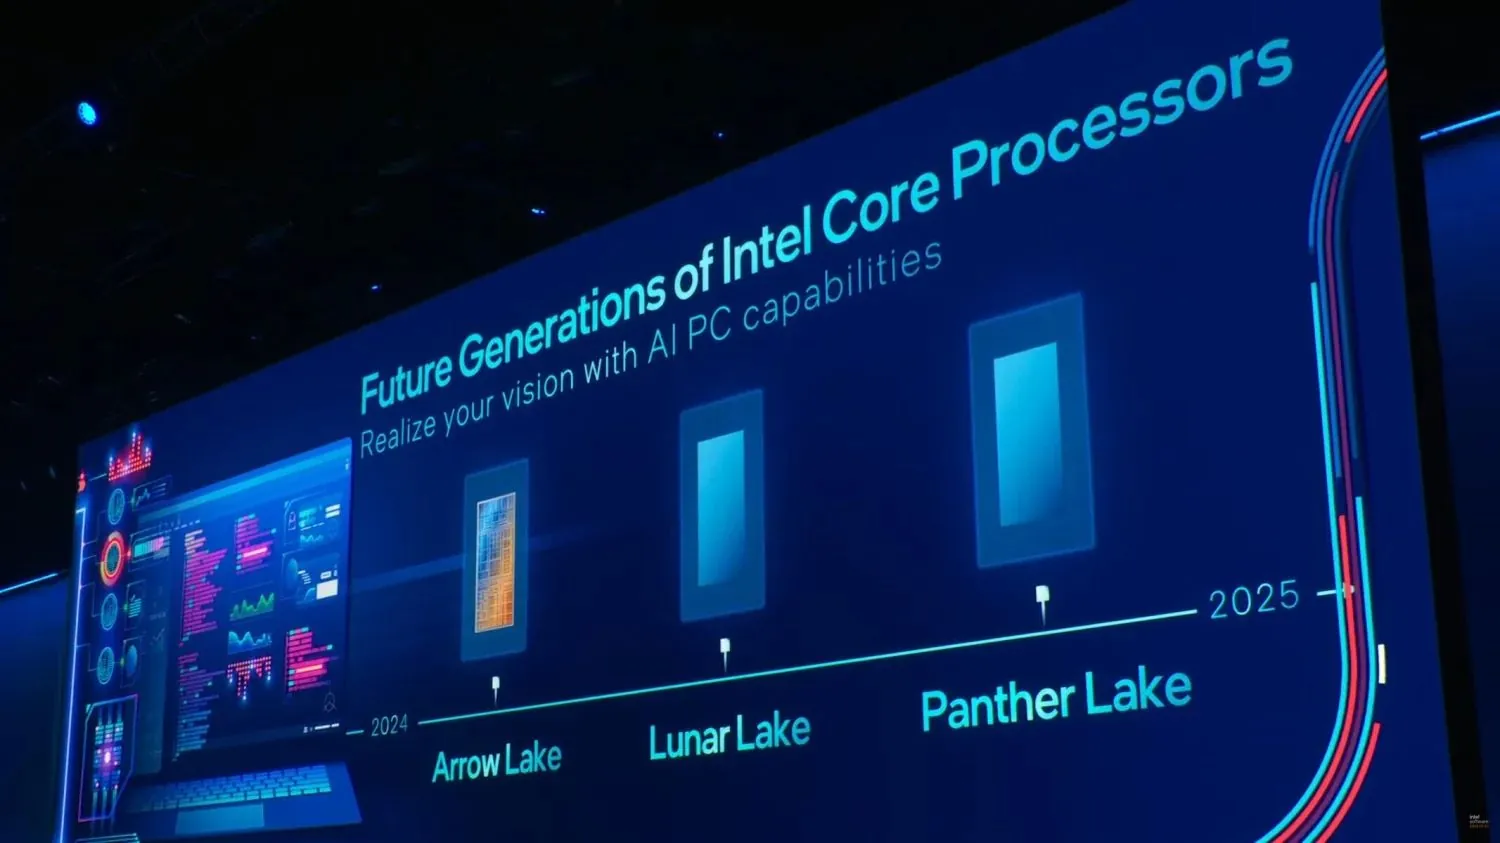 Intel Arrow Lake processor release delayed until 2025, news exposed